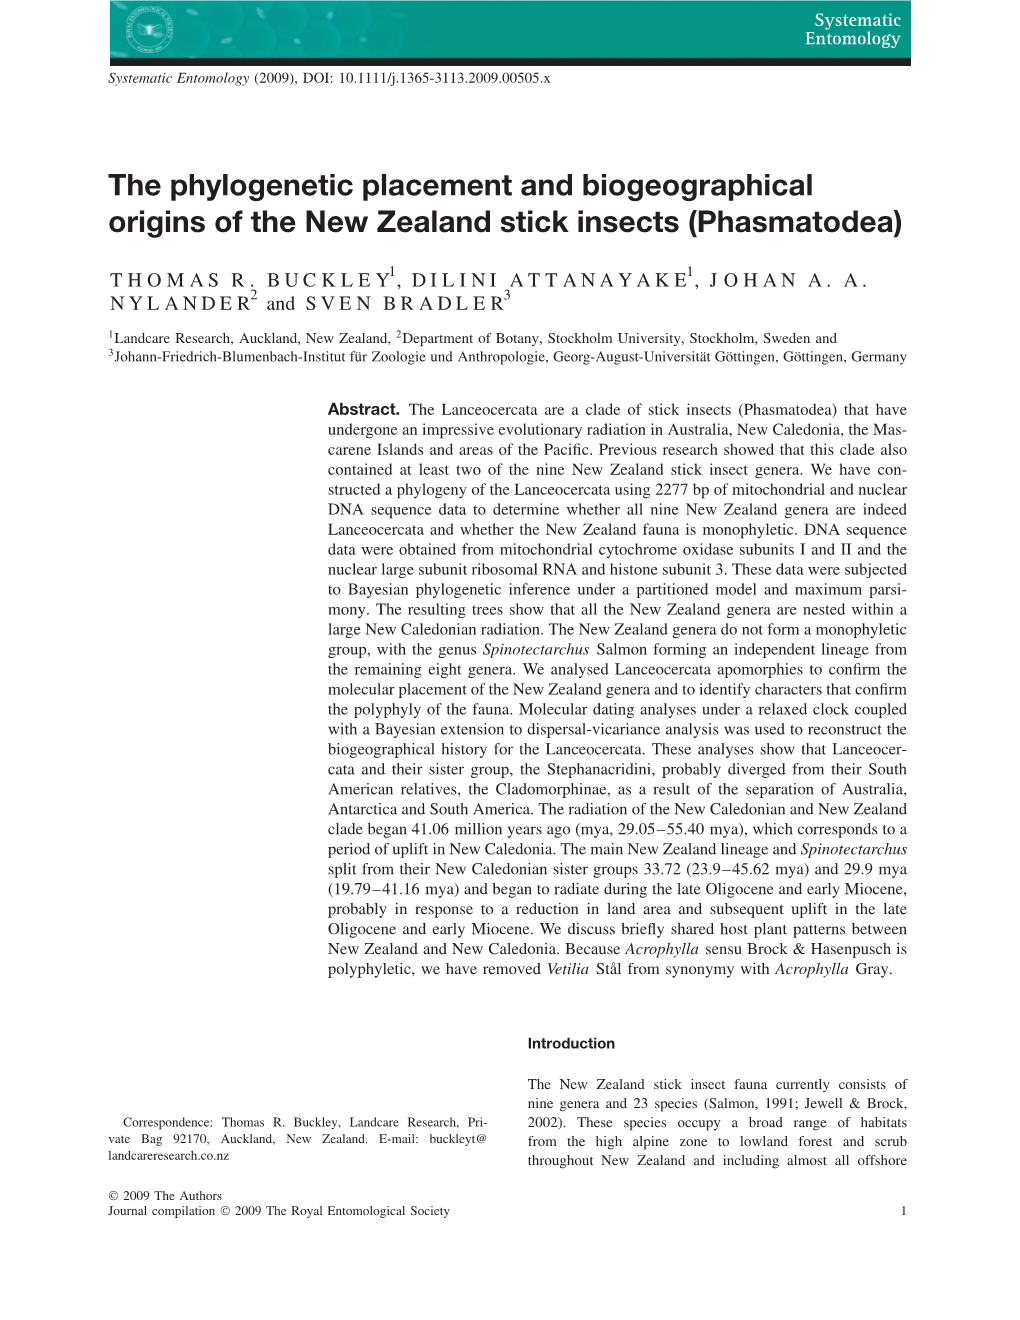 The Phylogenetic Placement and Biogeographical Origins of the New Zealand Stick Insects (Phasmatodea)